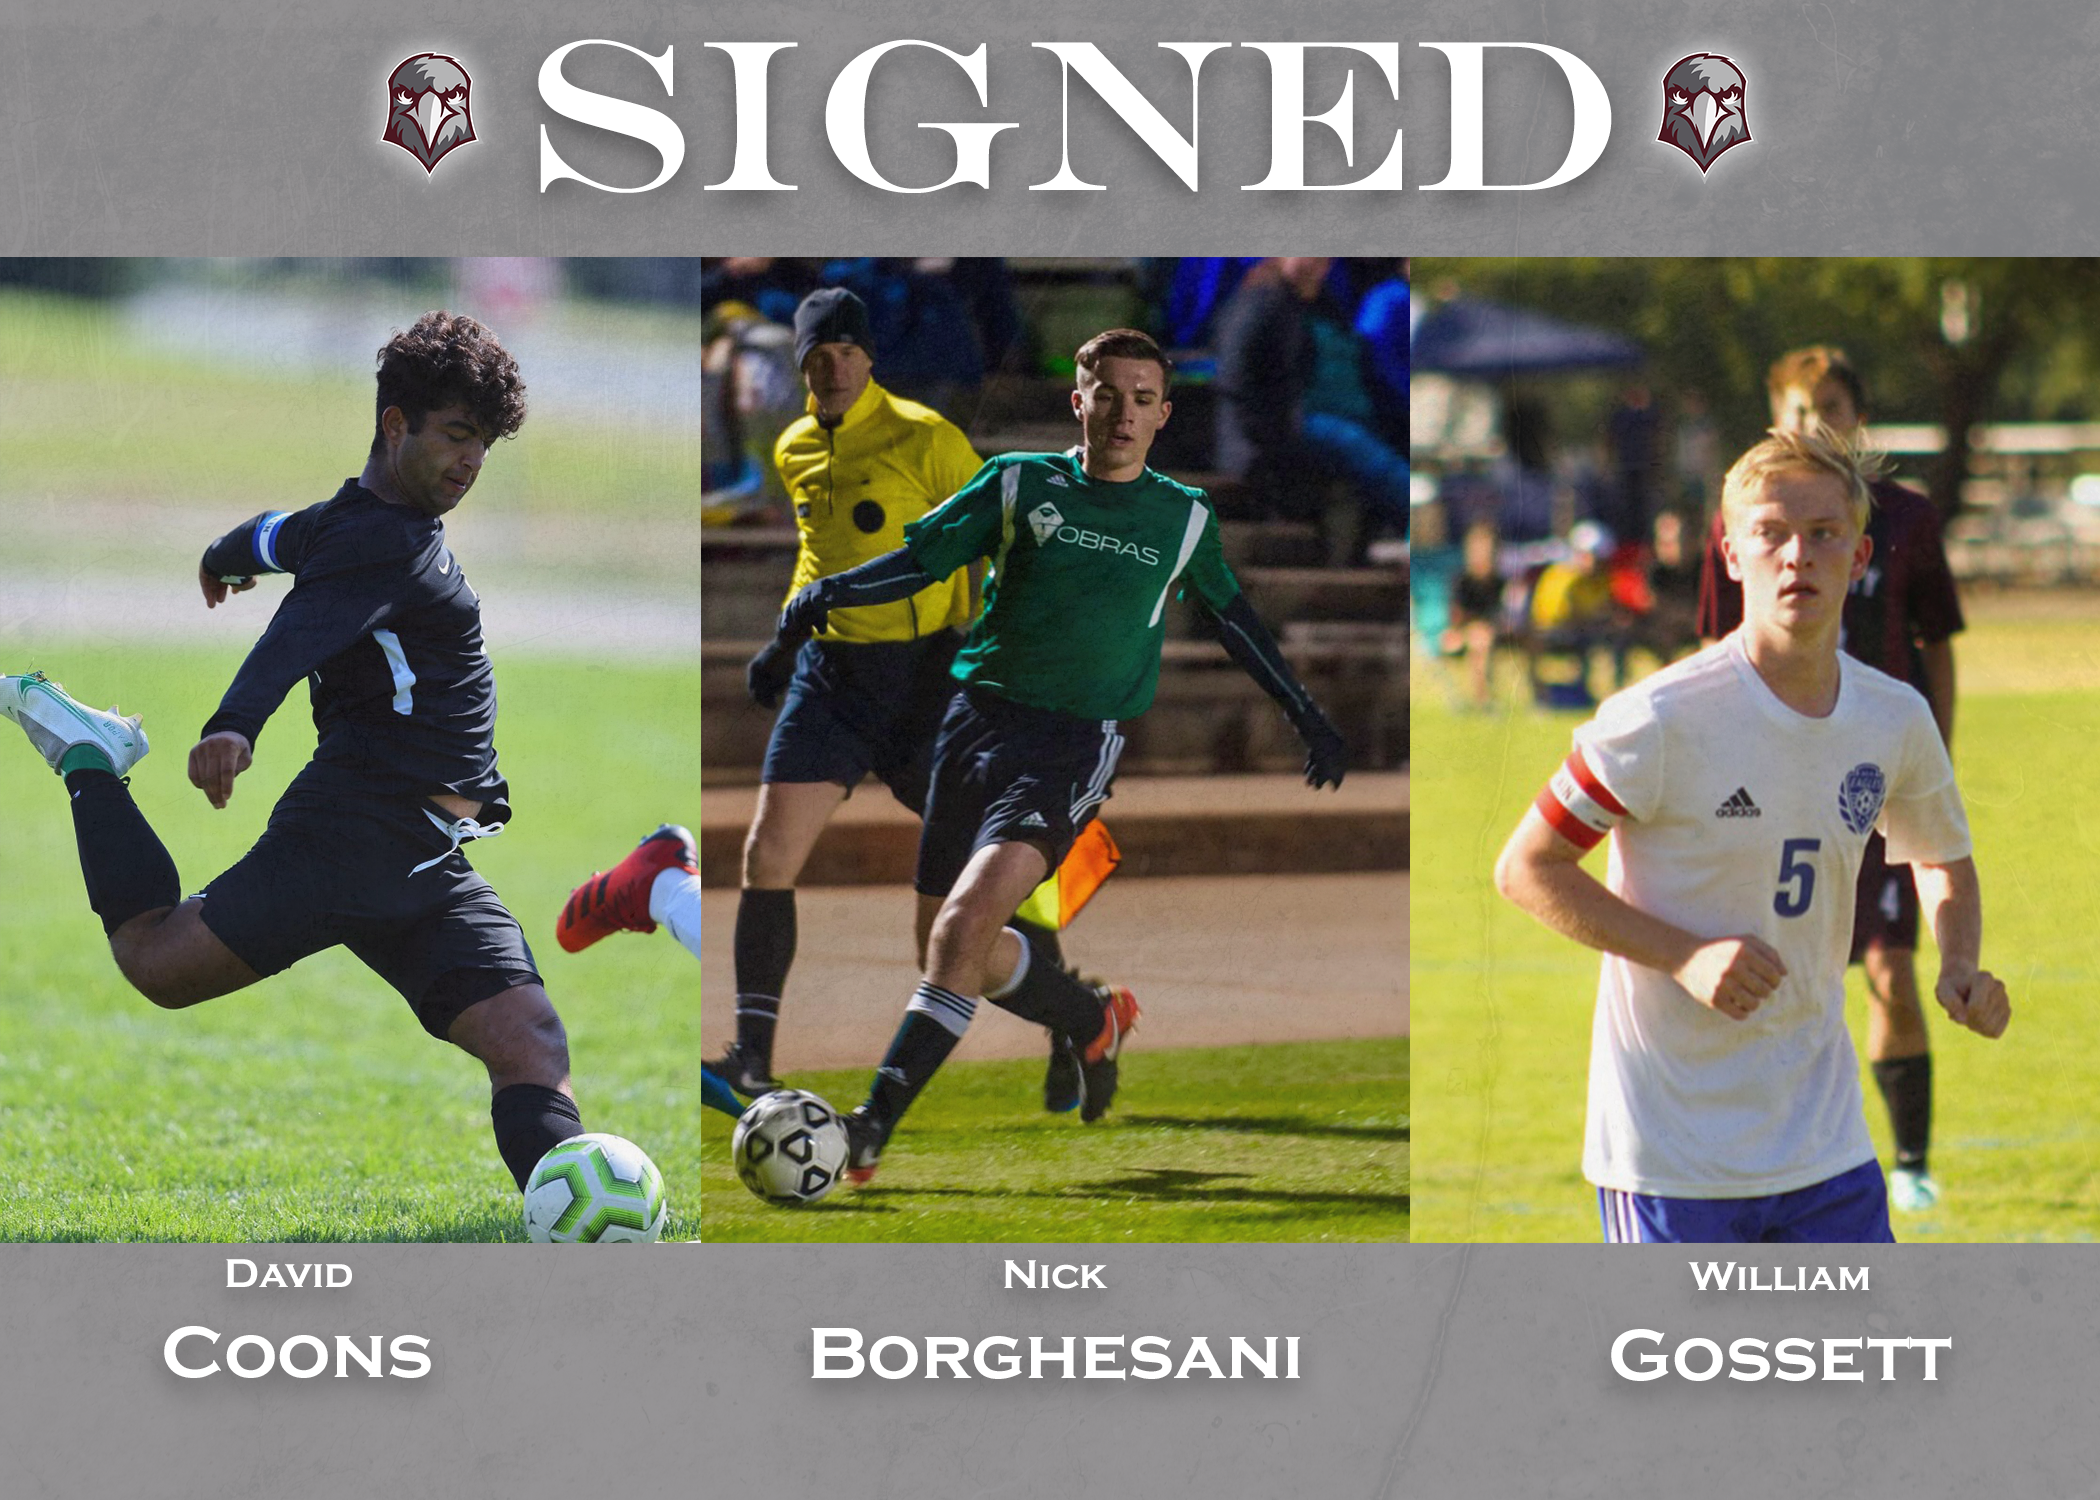 Gossett, Coons, and Borghesani Sign for the Eagles